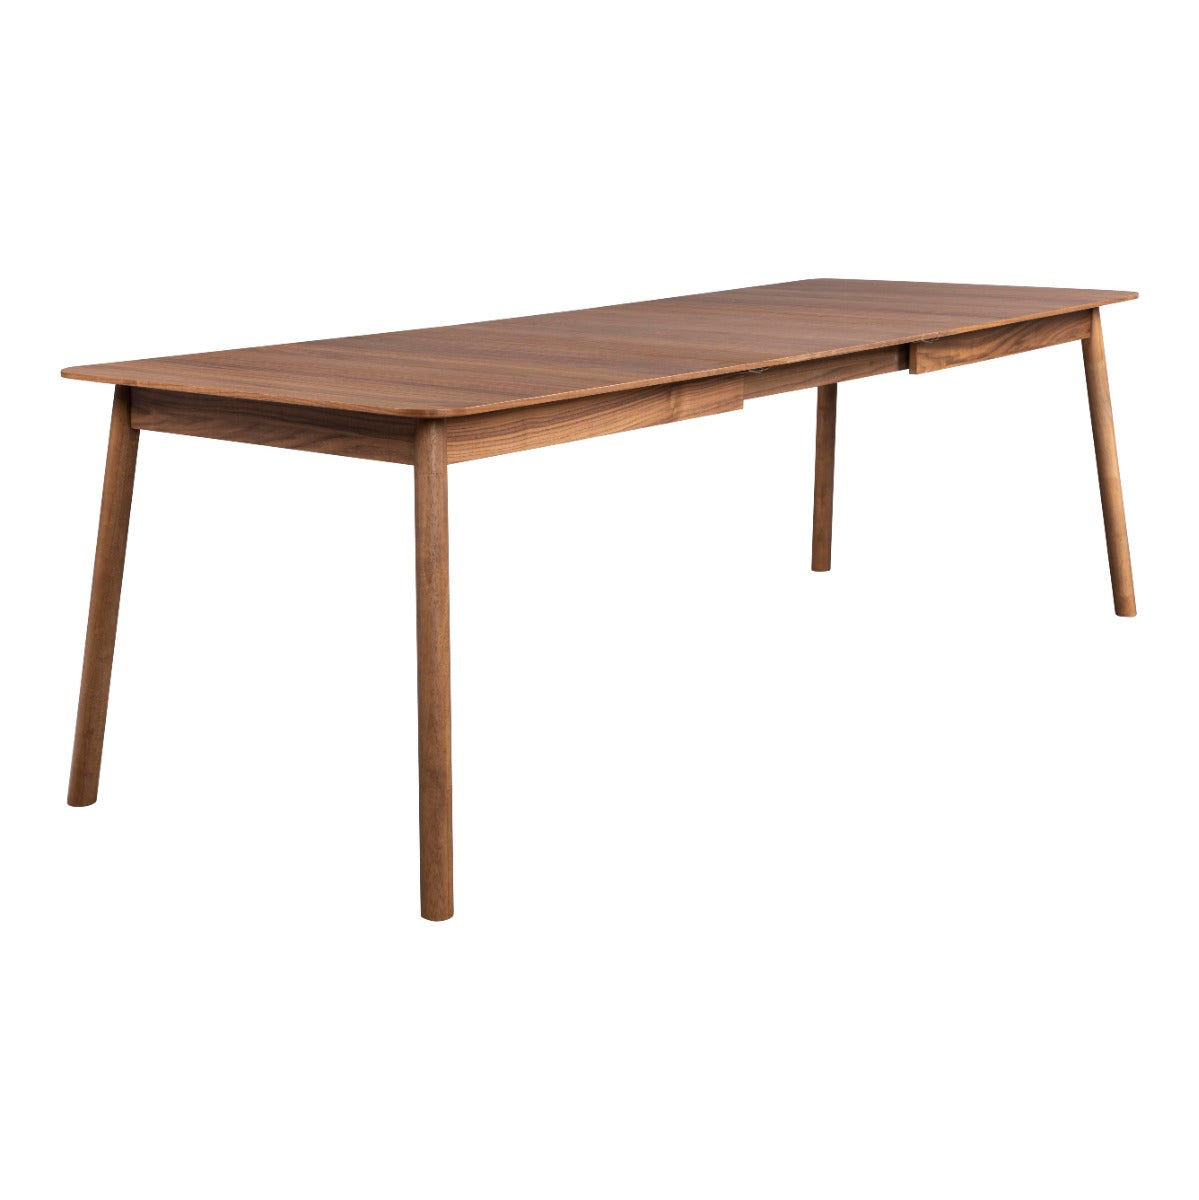 GLIMPS table 180/240 x 90 walnut, Zuiver, Eye on Design